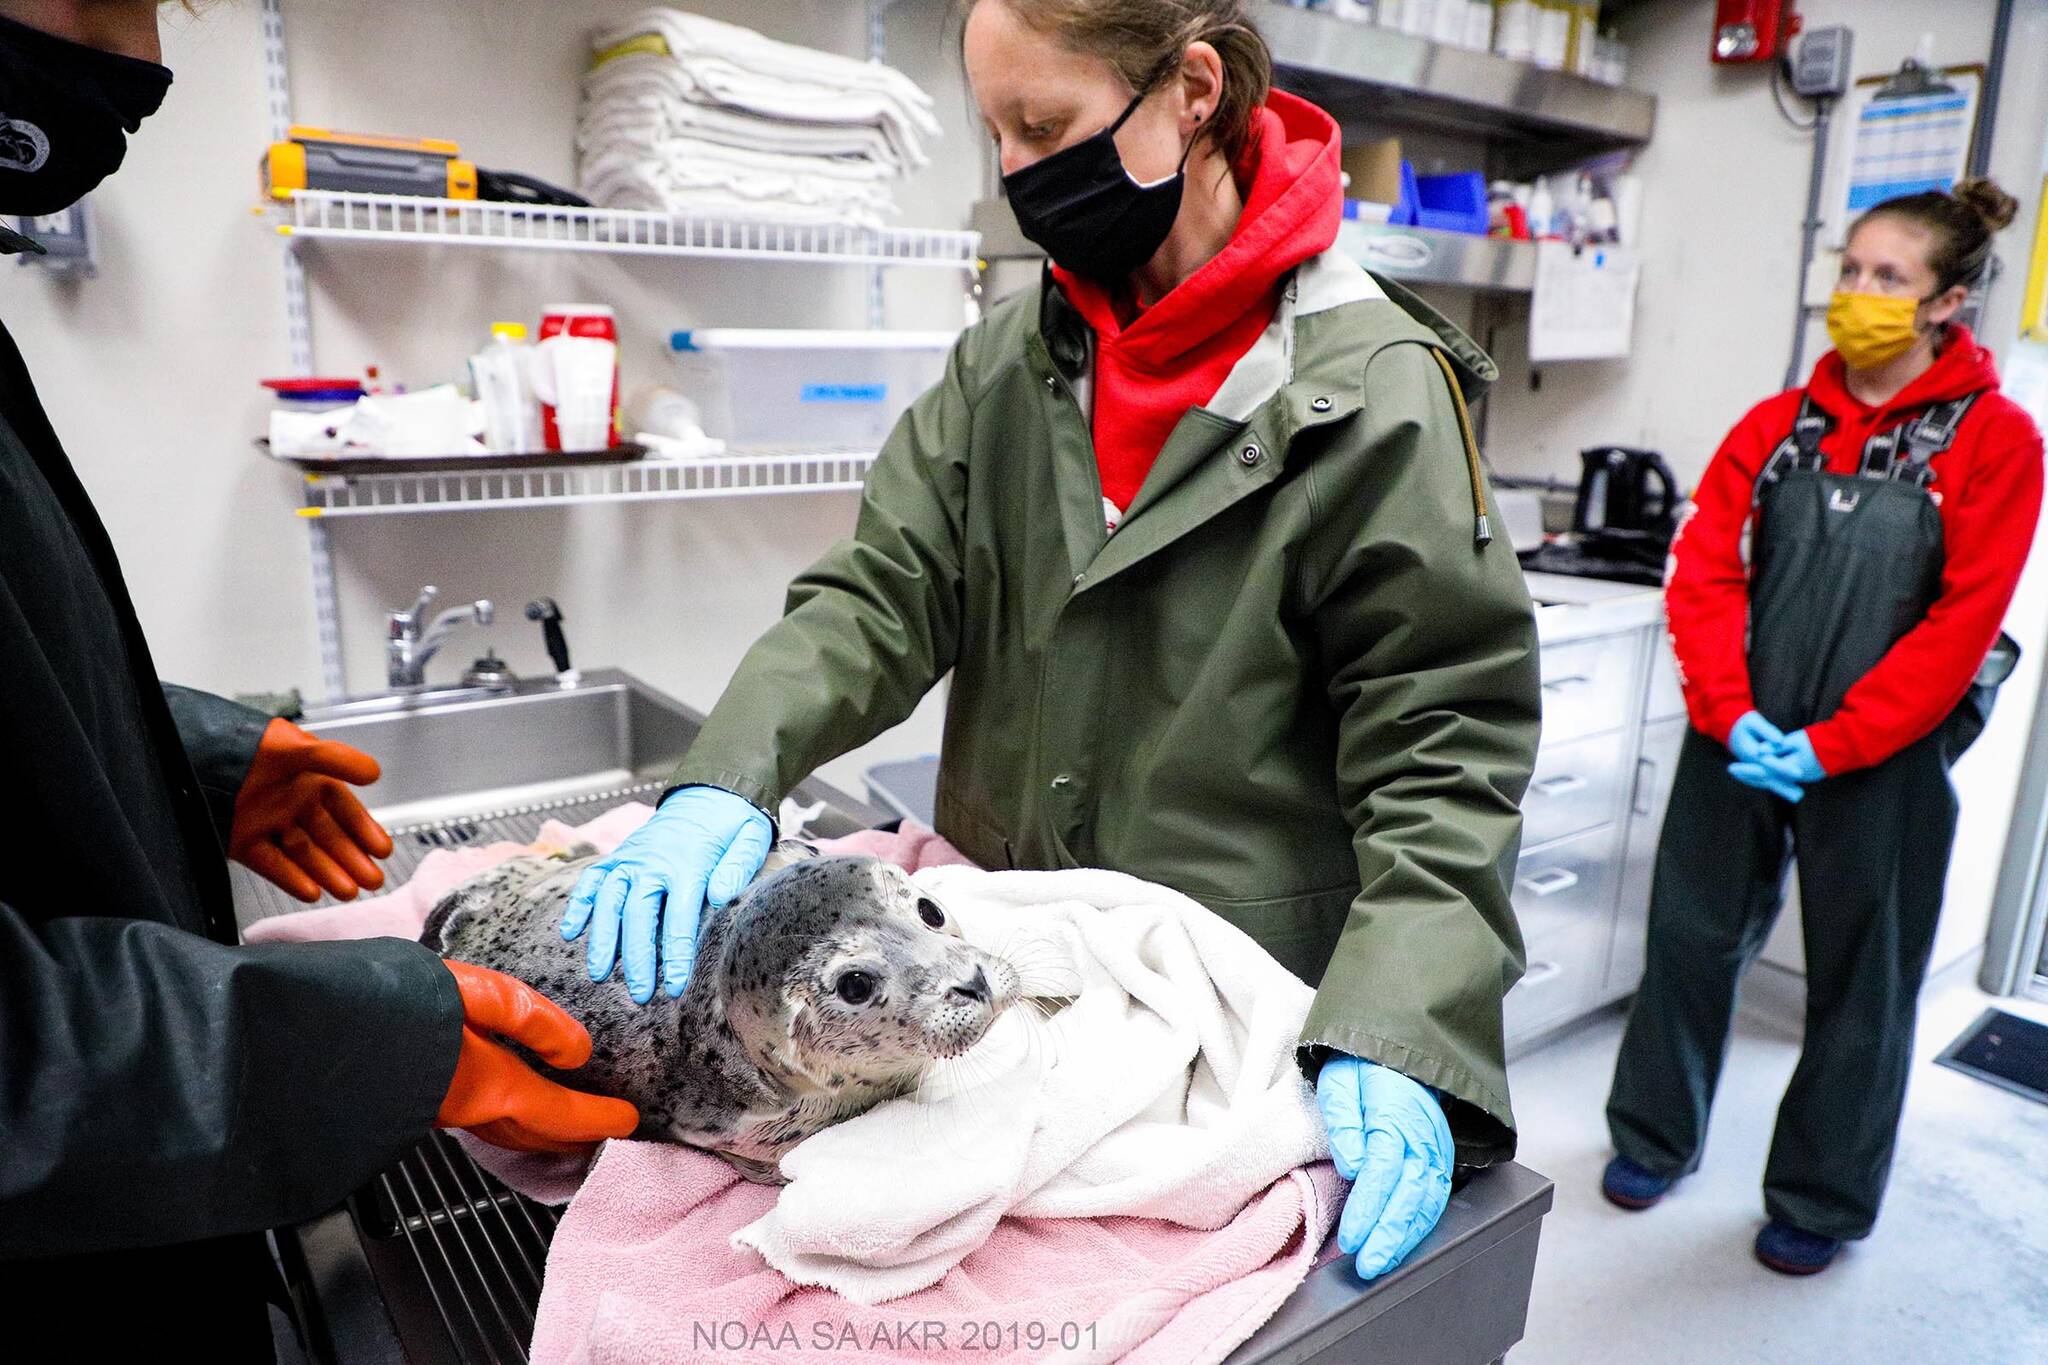 Staff members at the Alaska SeaLife Center near Seward attend to a harbor seal pup. This summer, one of the pups in the center’s care came from Juneau. The seal received treatment at the center and was released into the wild in September. (Courtesy photo/Alaska SeaLife Center/Kaiti Chritz)